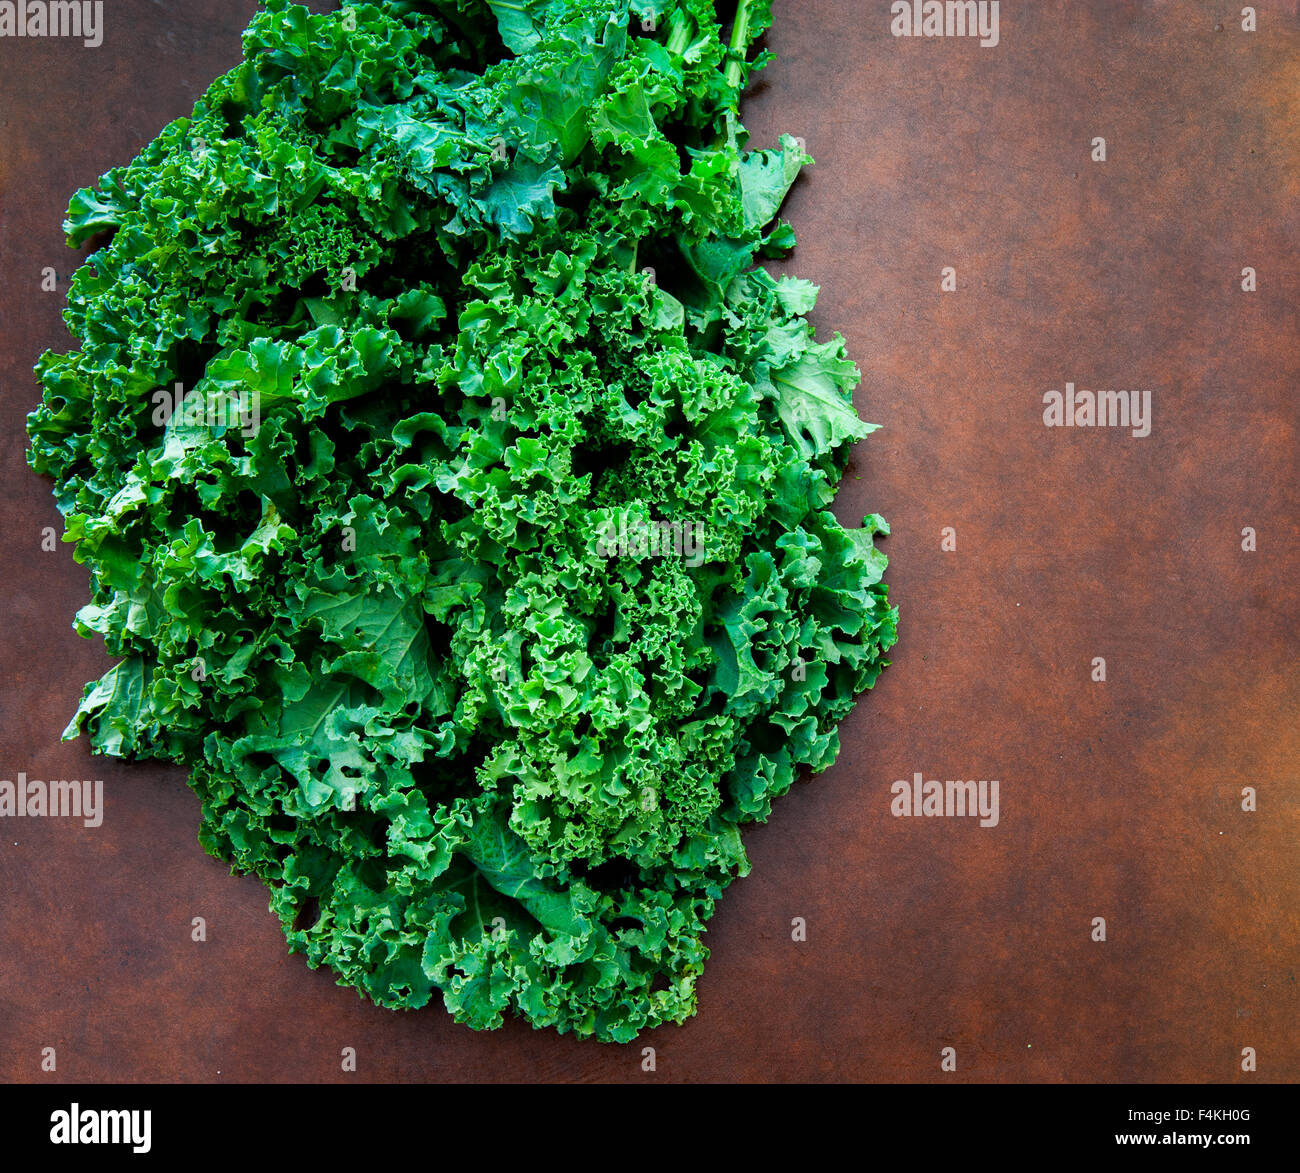 Bunch of fresh raw green kale plant on brown table Stock Photo